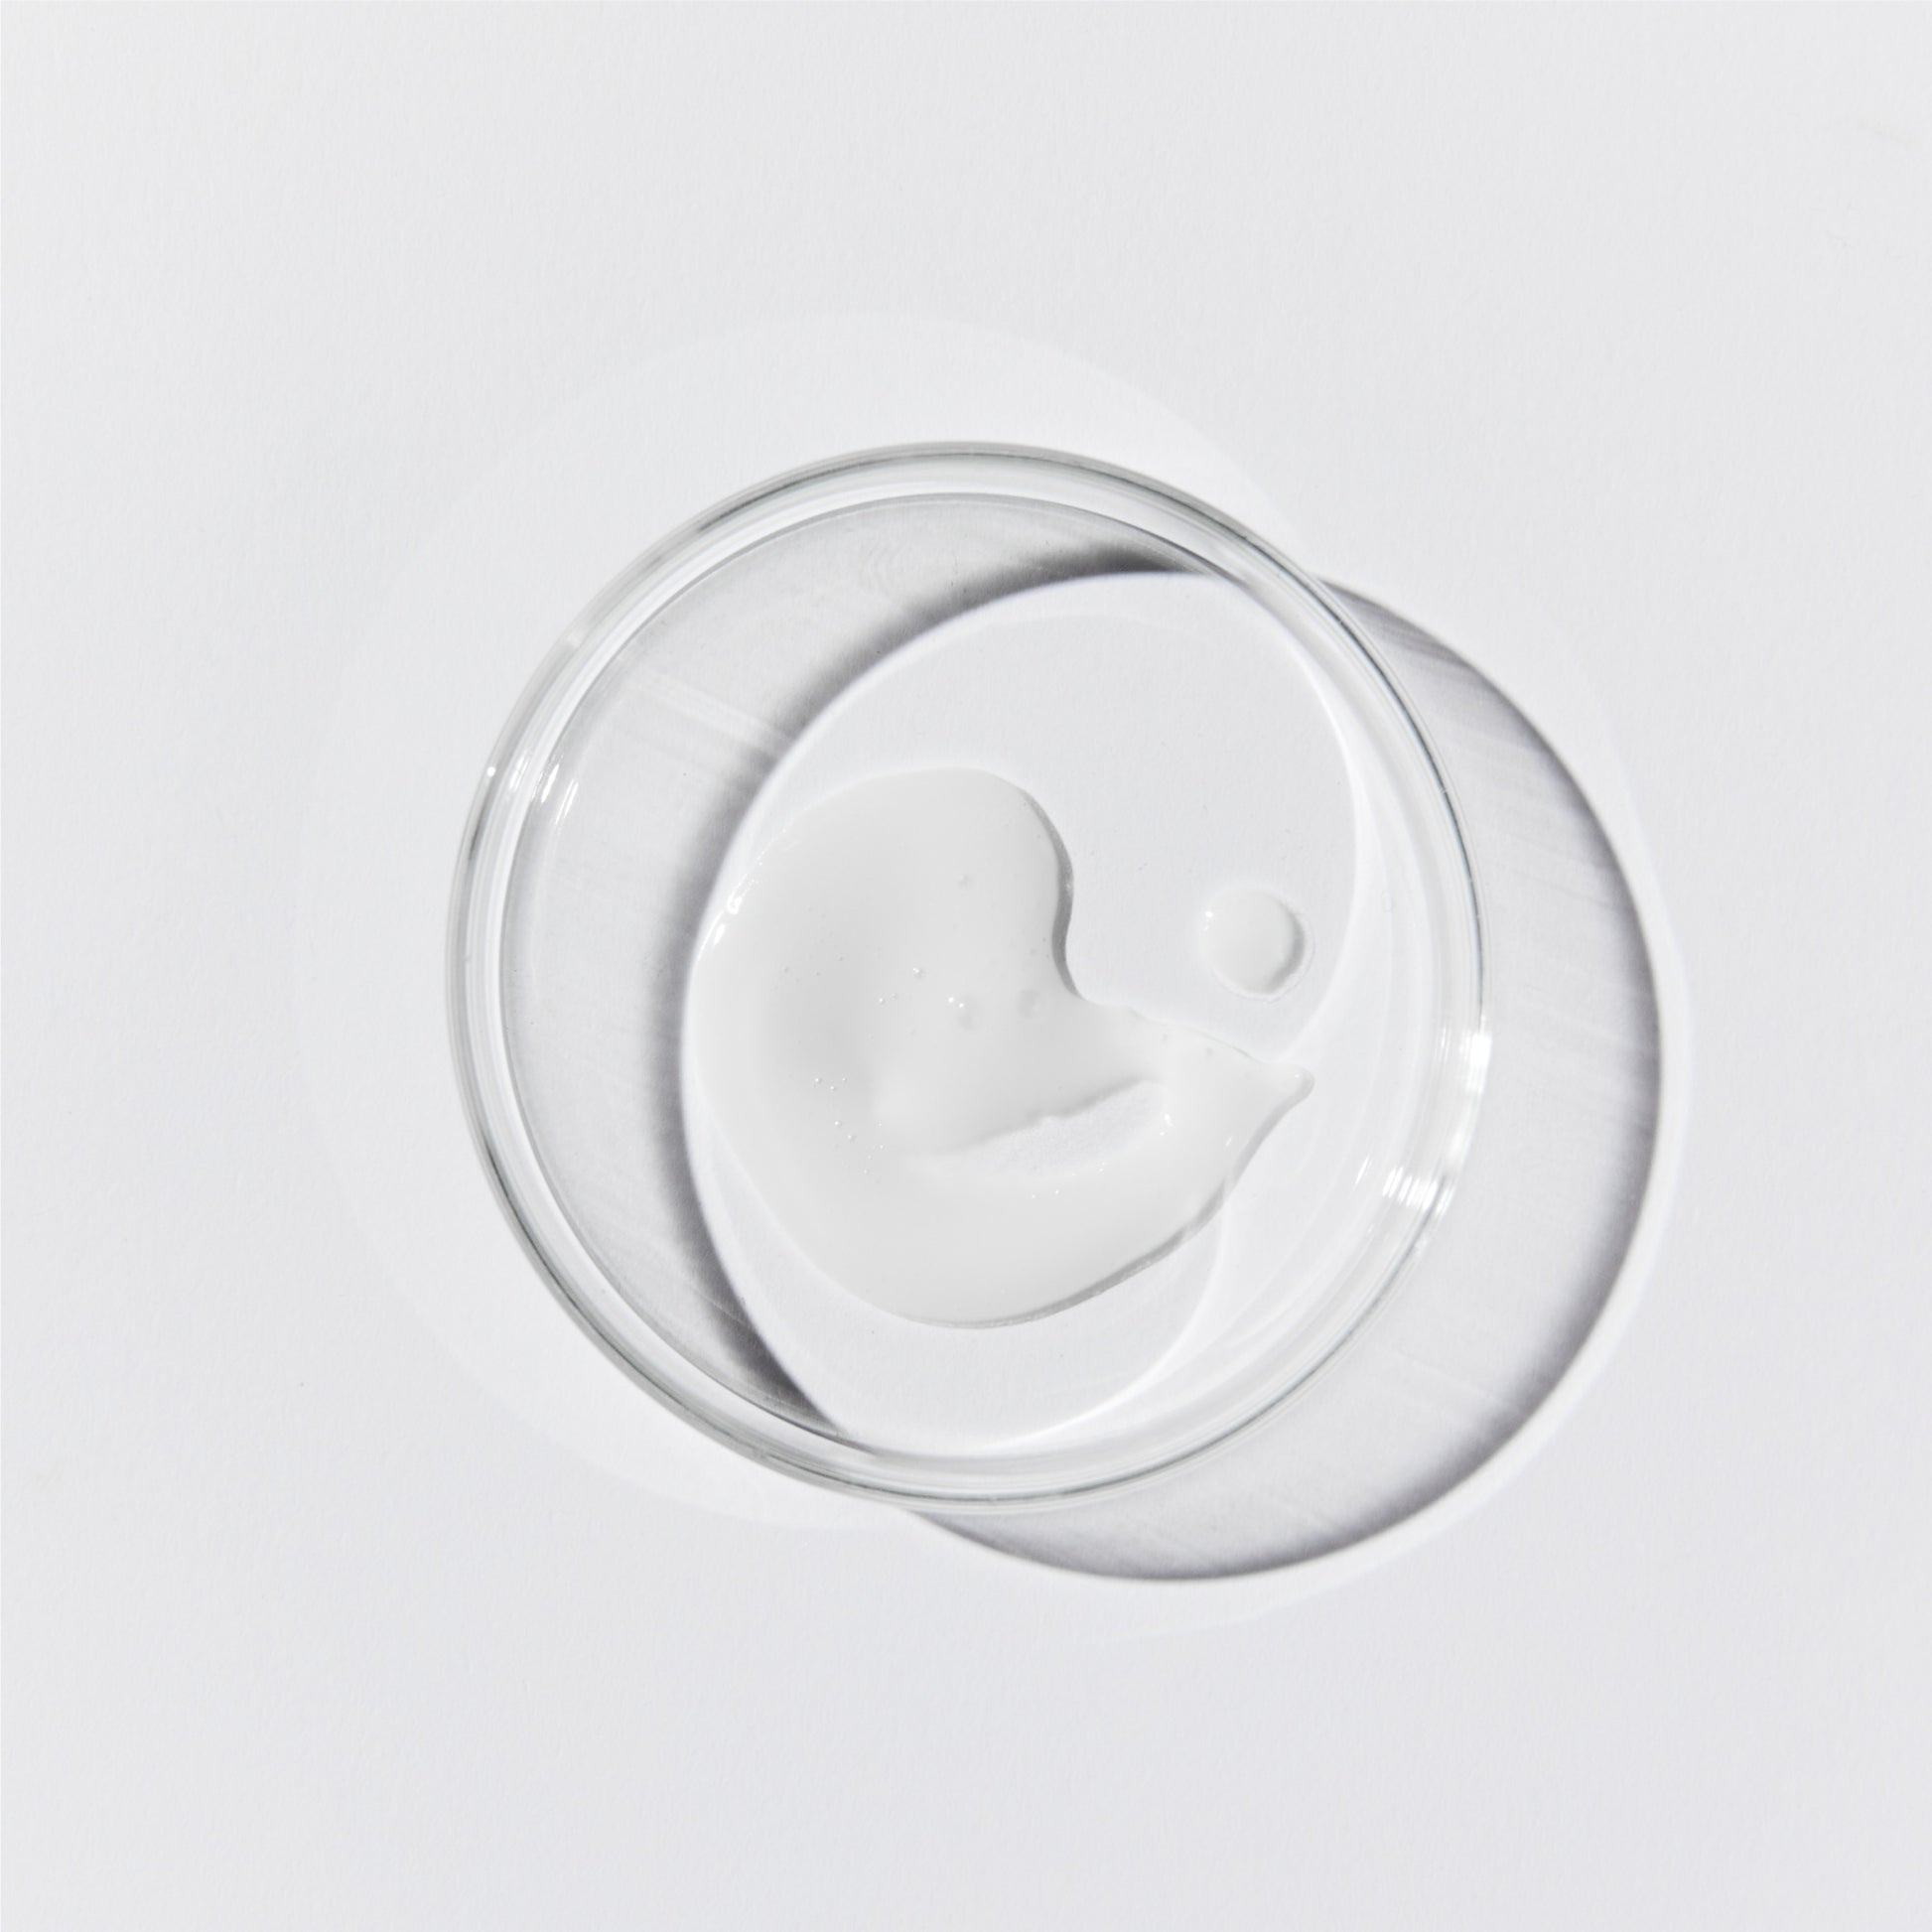 Aerial shot of the serum. Its an opaque, white liquid in a petri dish set against a white background.